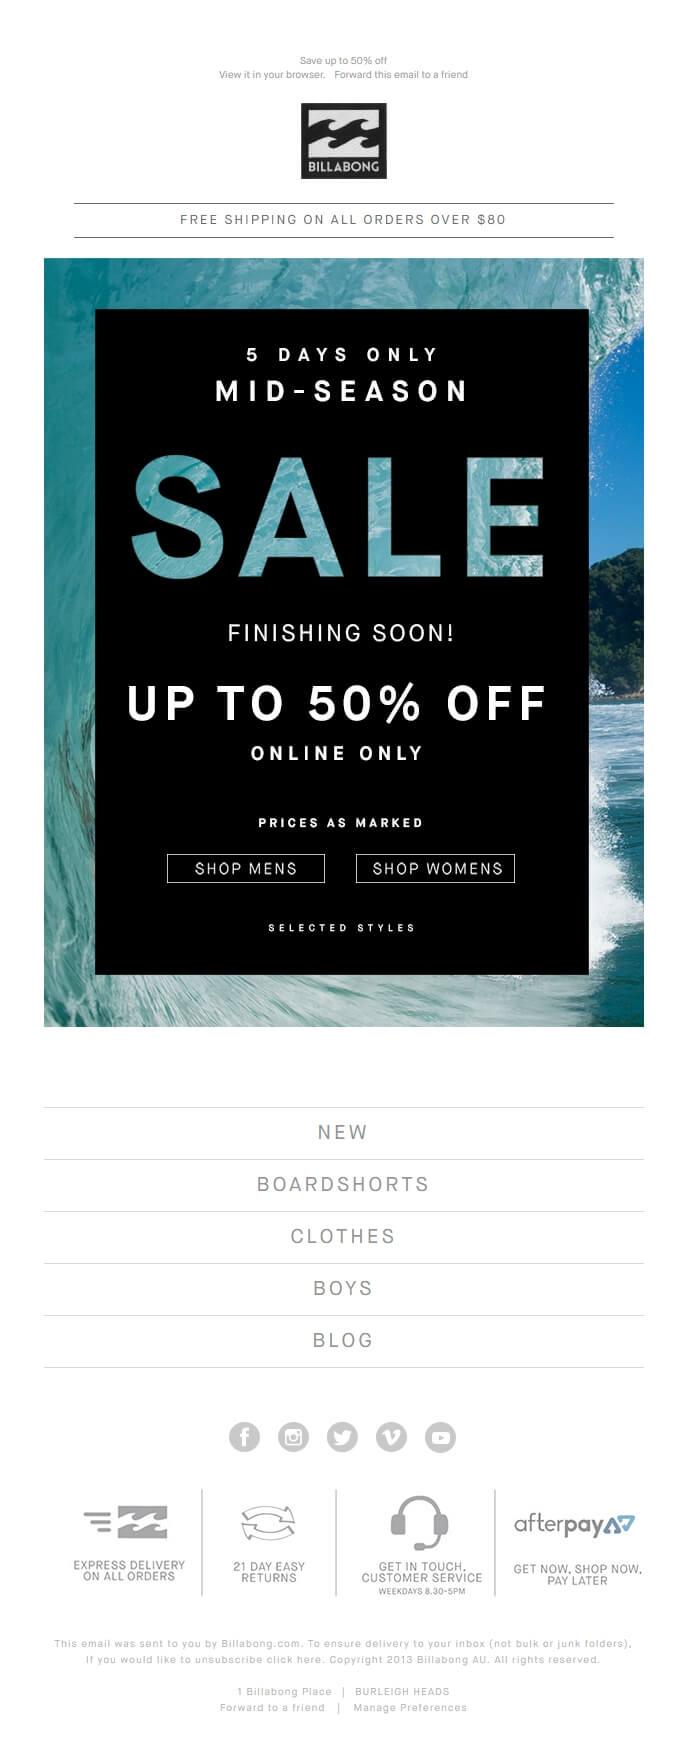 A marketing email by Billabong that shows content for thier male subscribers